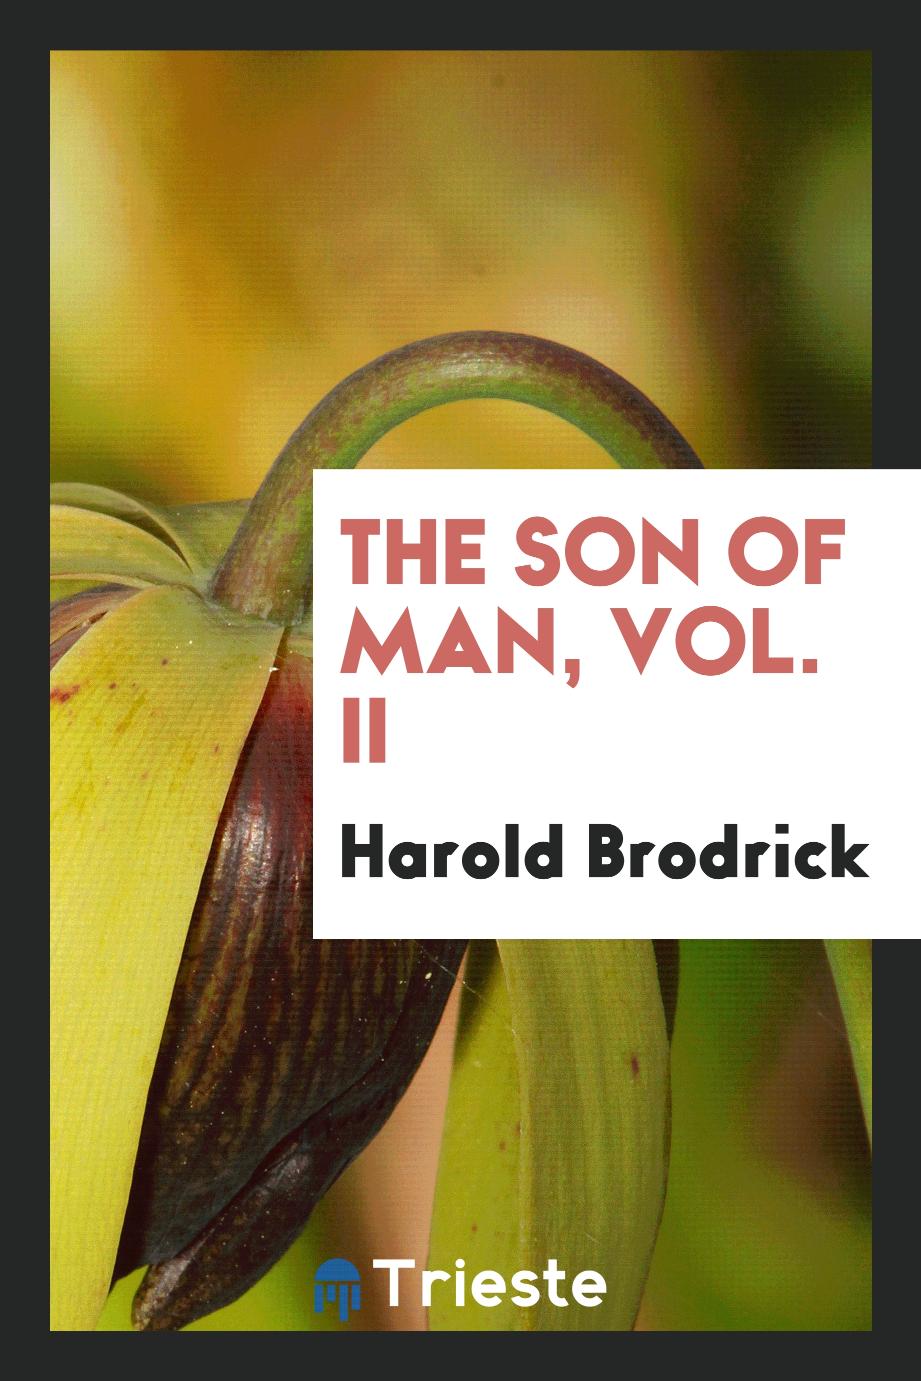 The Son of Man, Vol. II